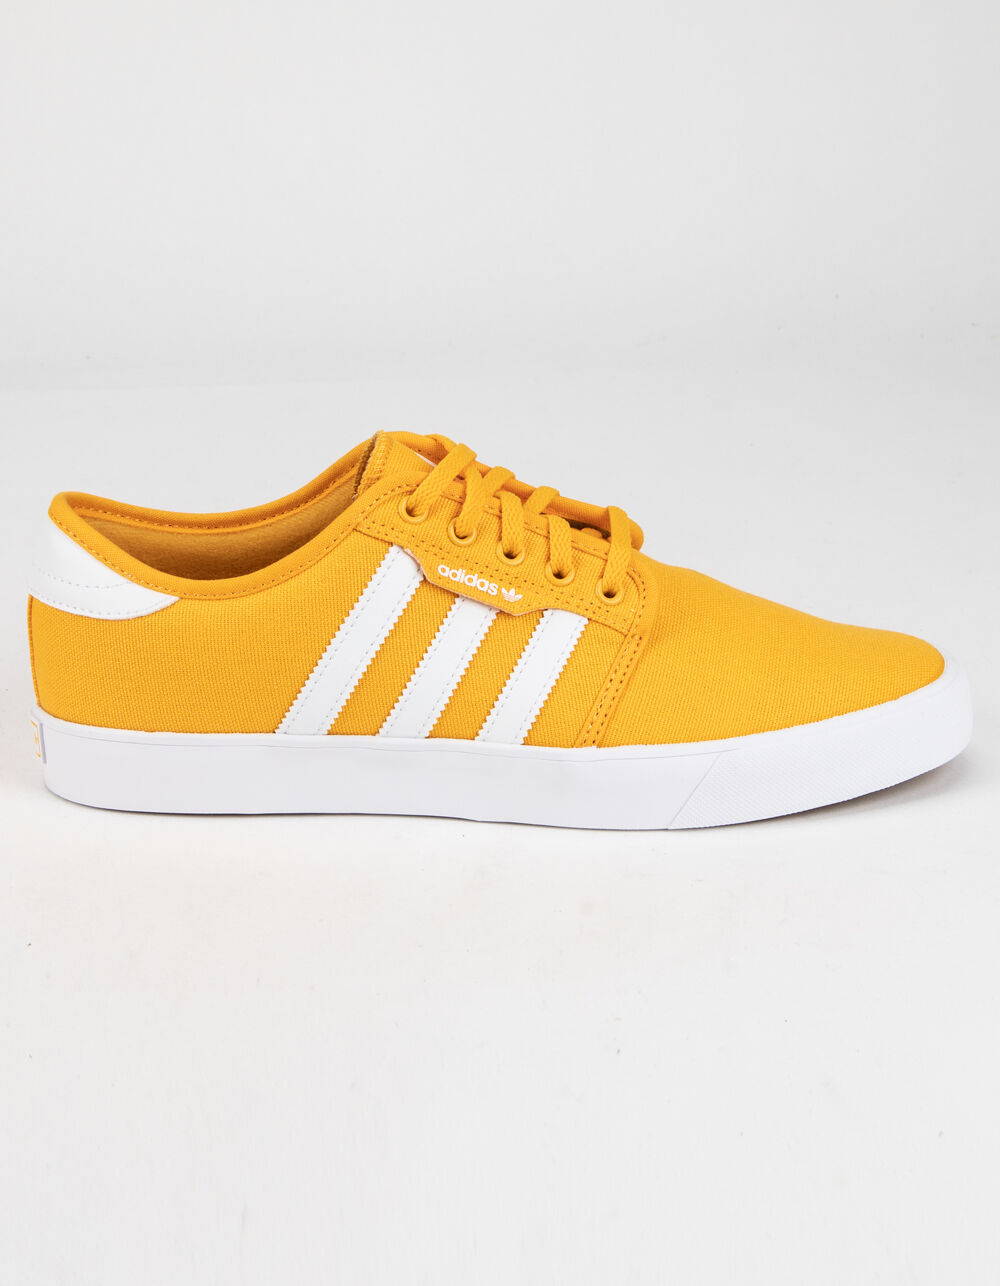 Amarillento sugerir Lo anterior ADIDAS Seeley Yellow Shoes - YELLOW | Tillys